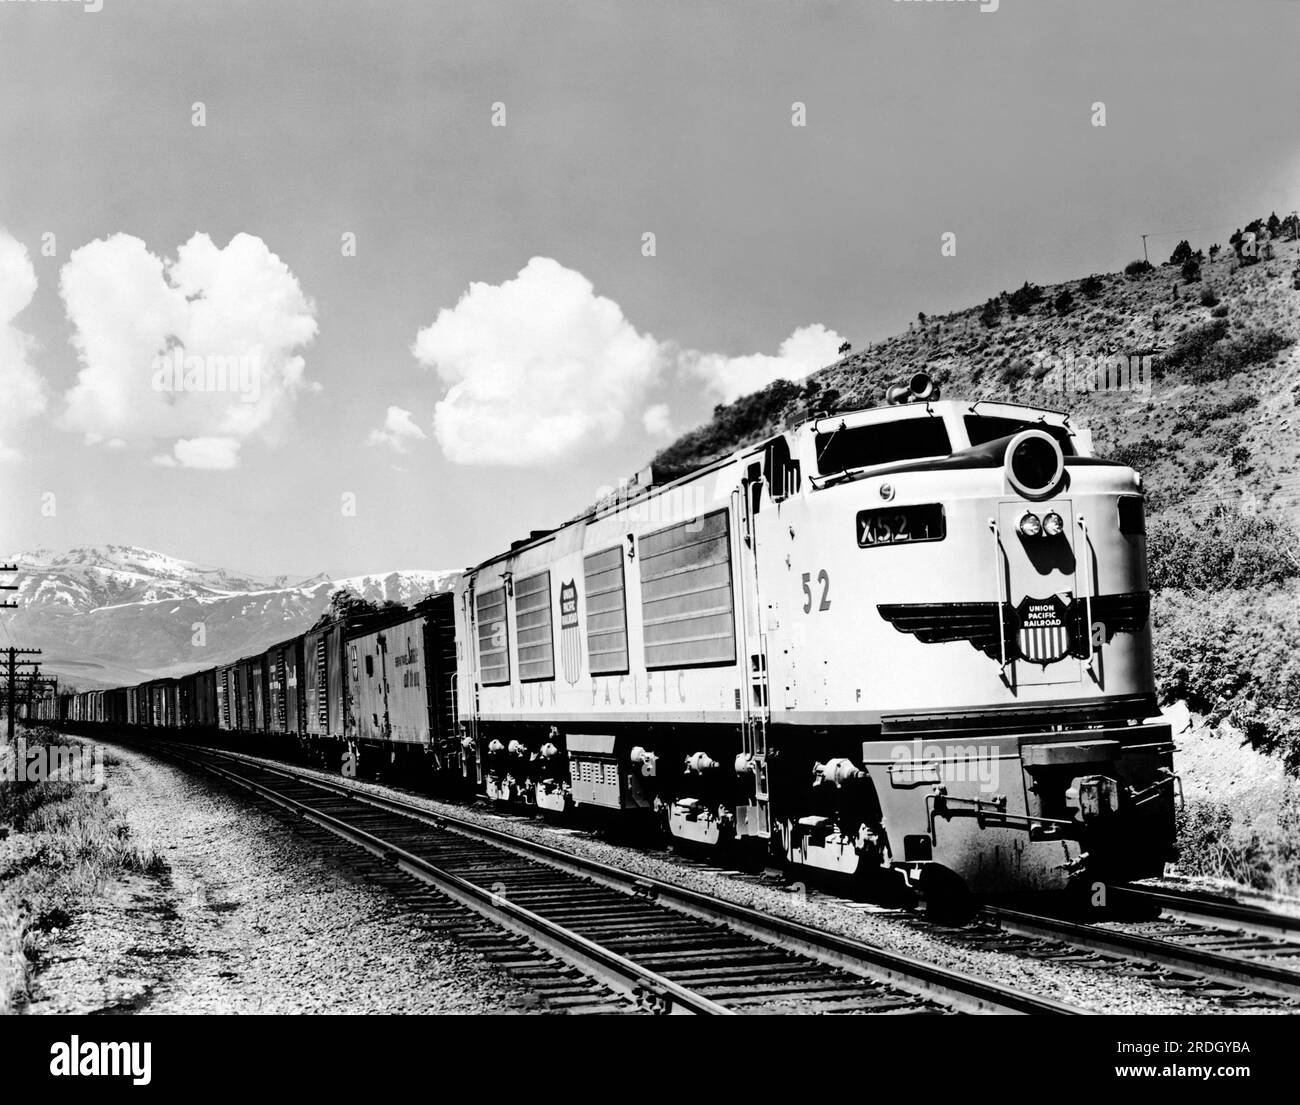 United States: c. 1950 A Union Pacific Railroad freight train in the ...